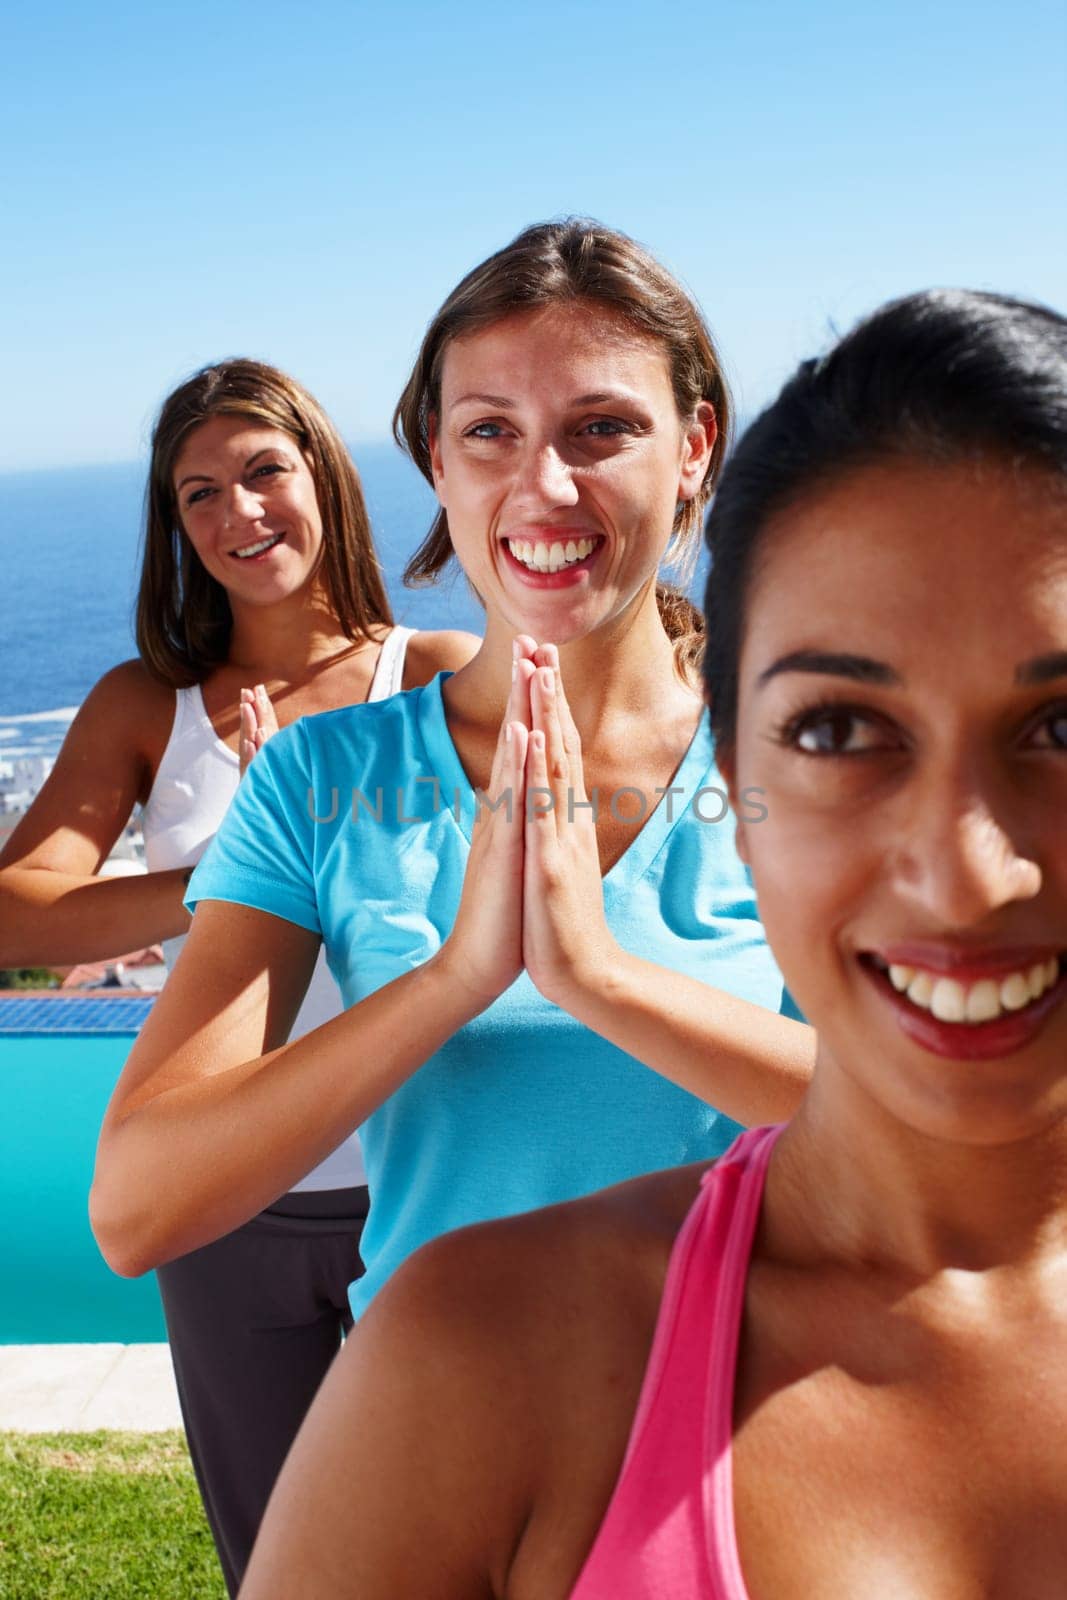 Fitness and friends. Three young women smiling in a yoga position against a scenic background